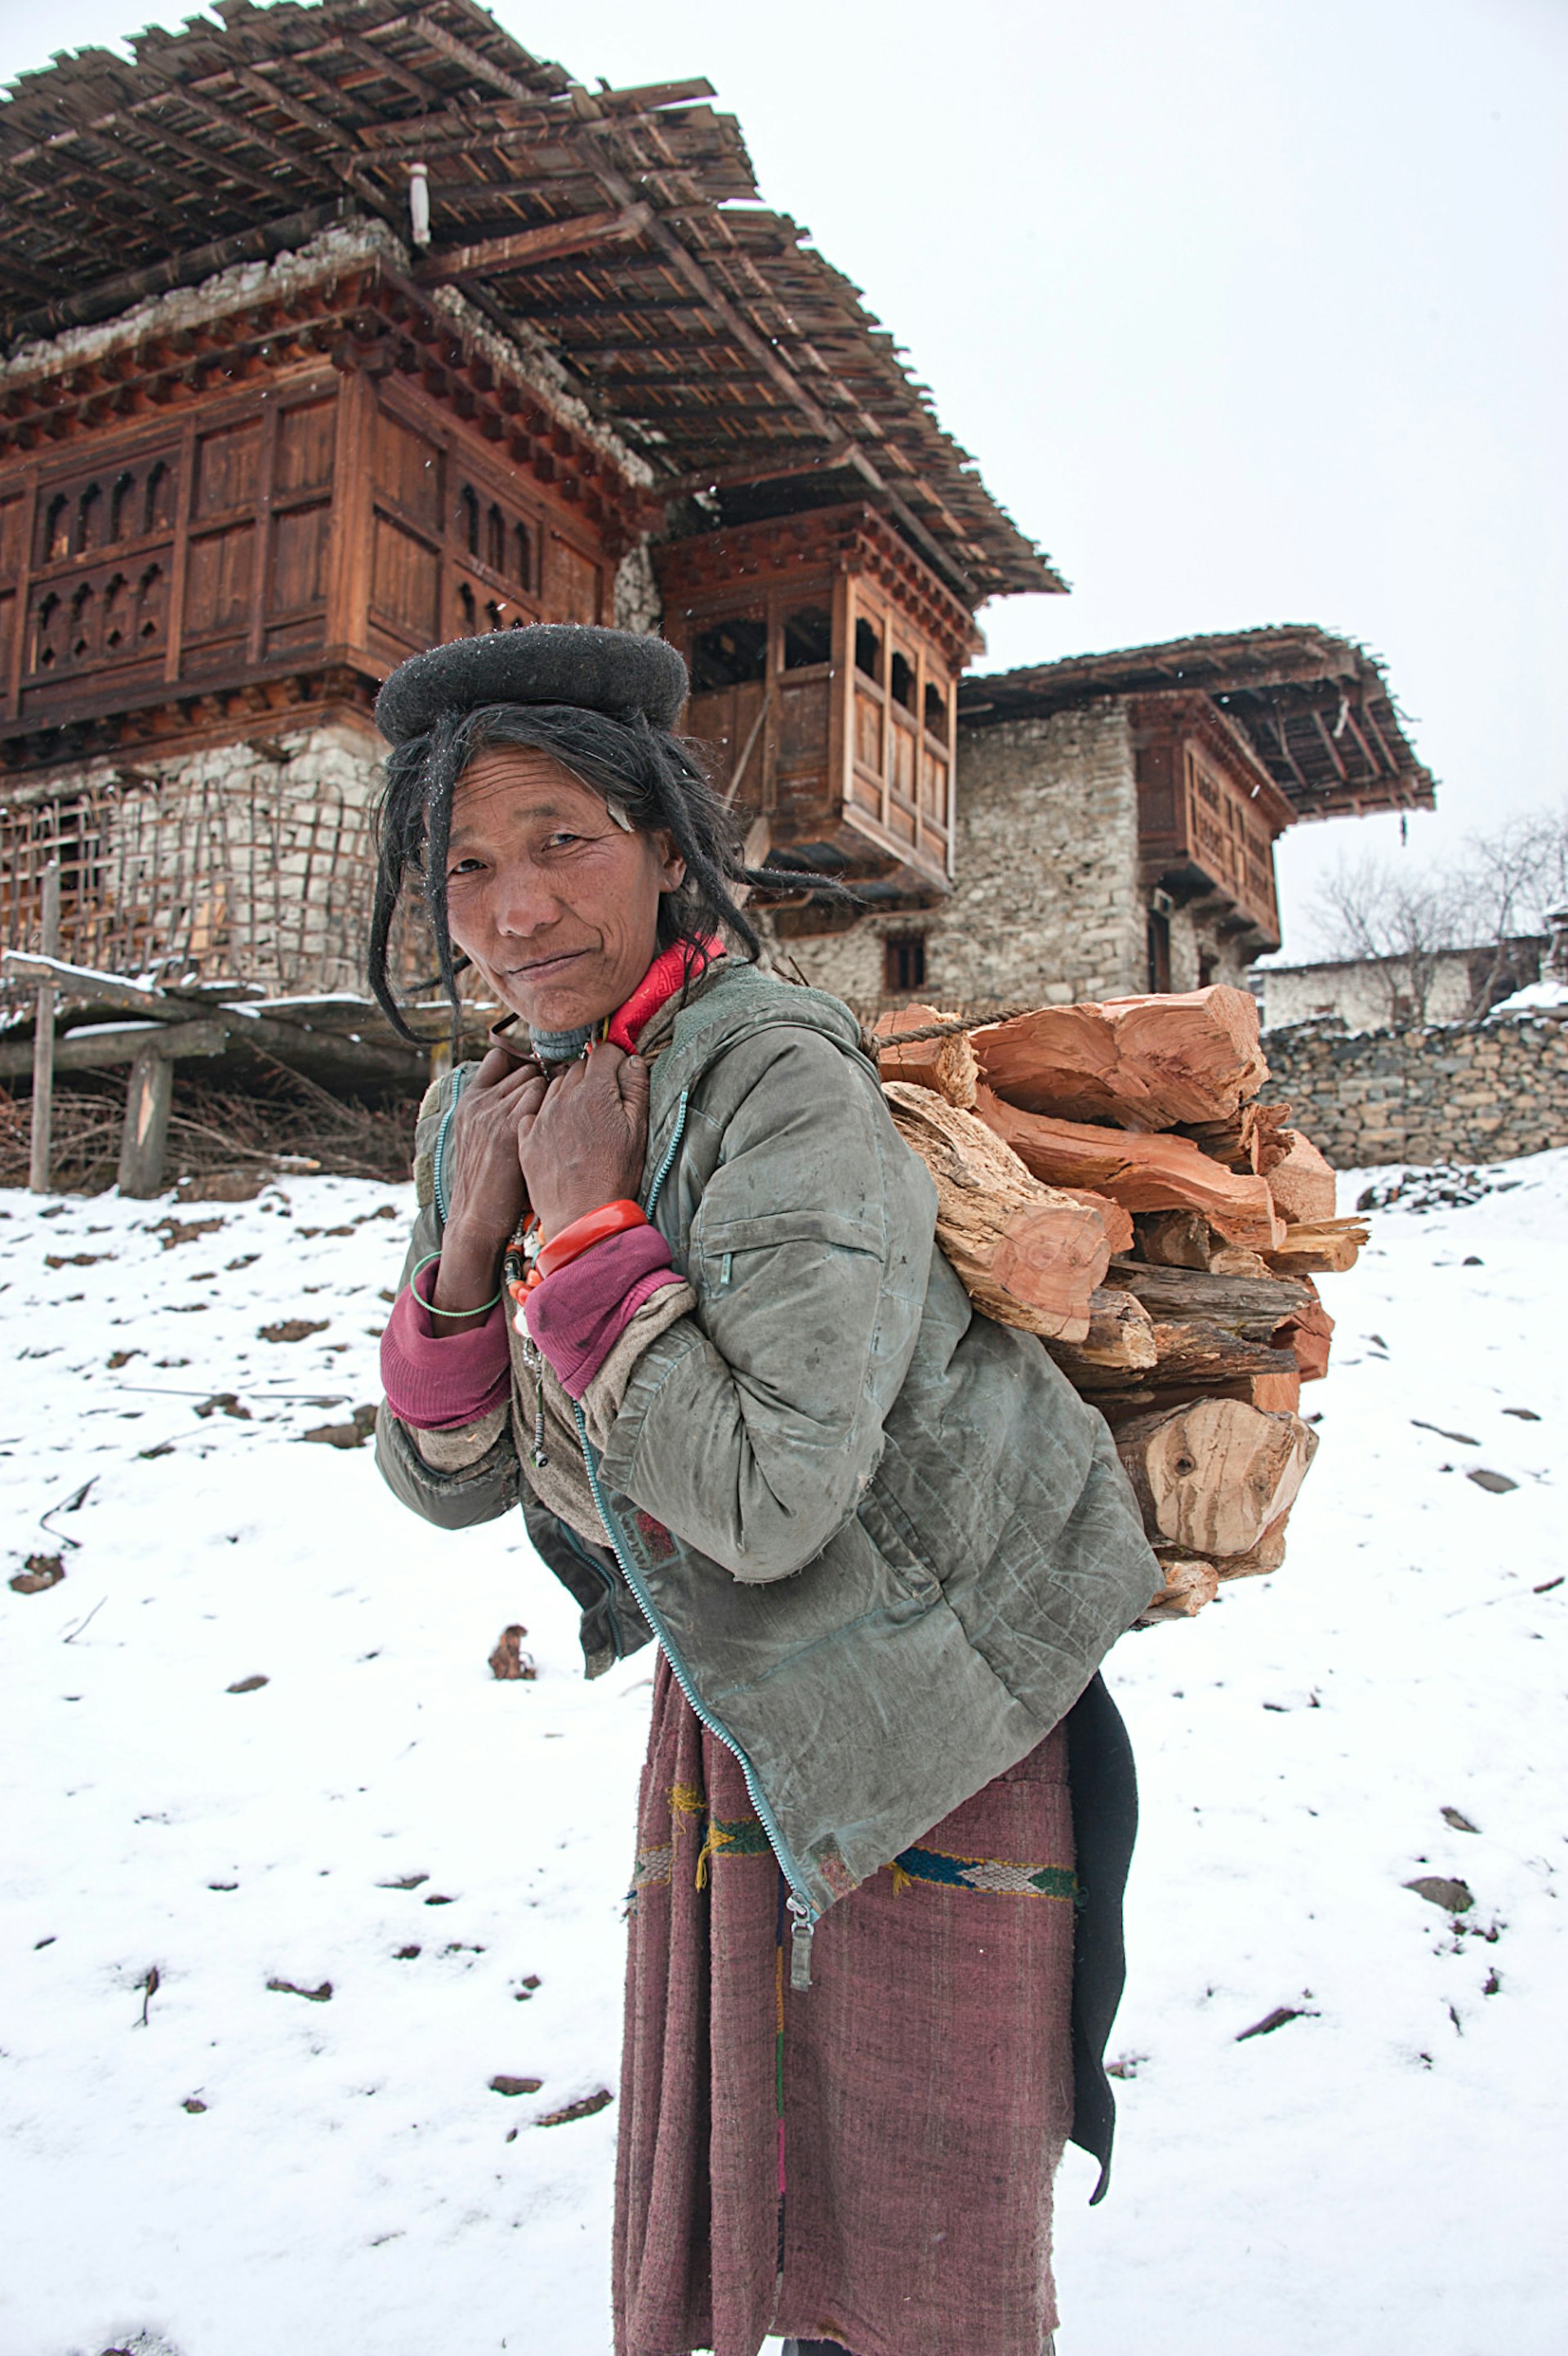 Brokpa woman carrying firewood in the snow © Diana Mayfield / Getty Images